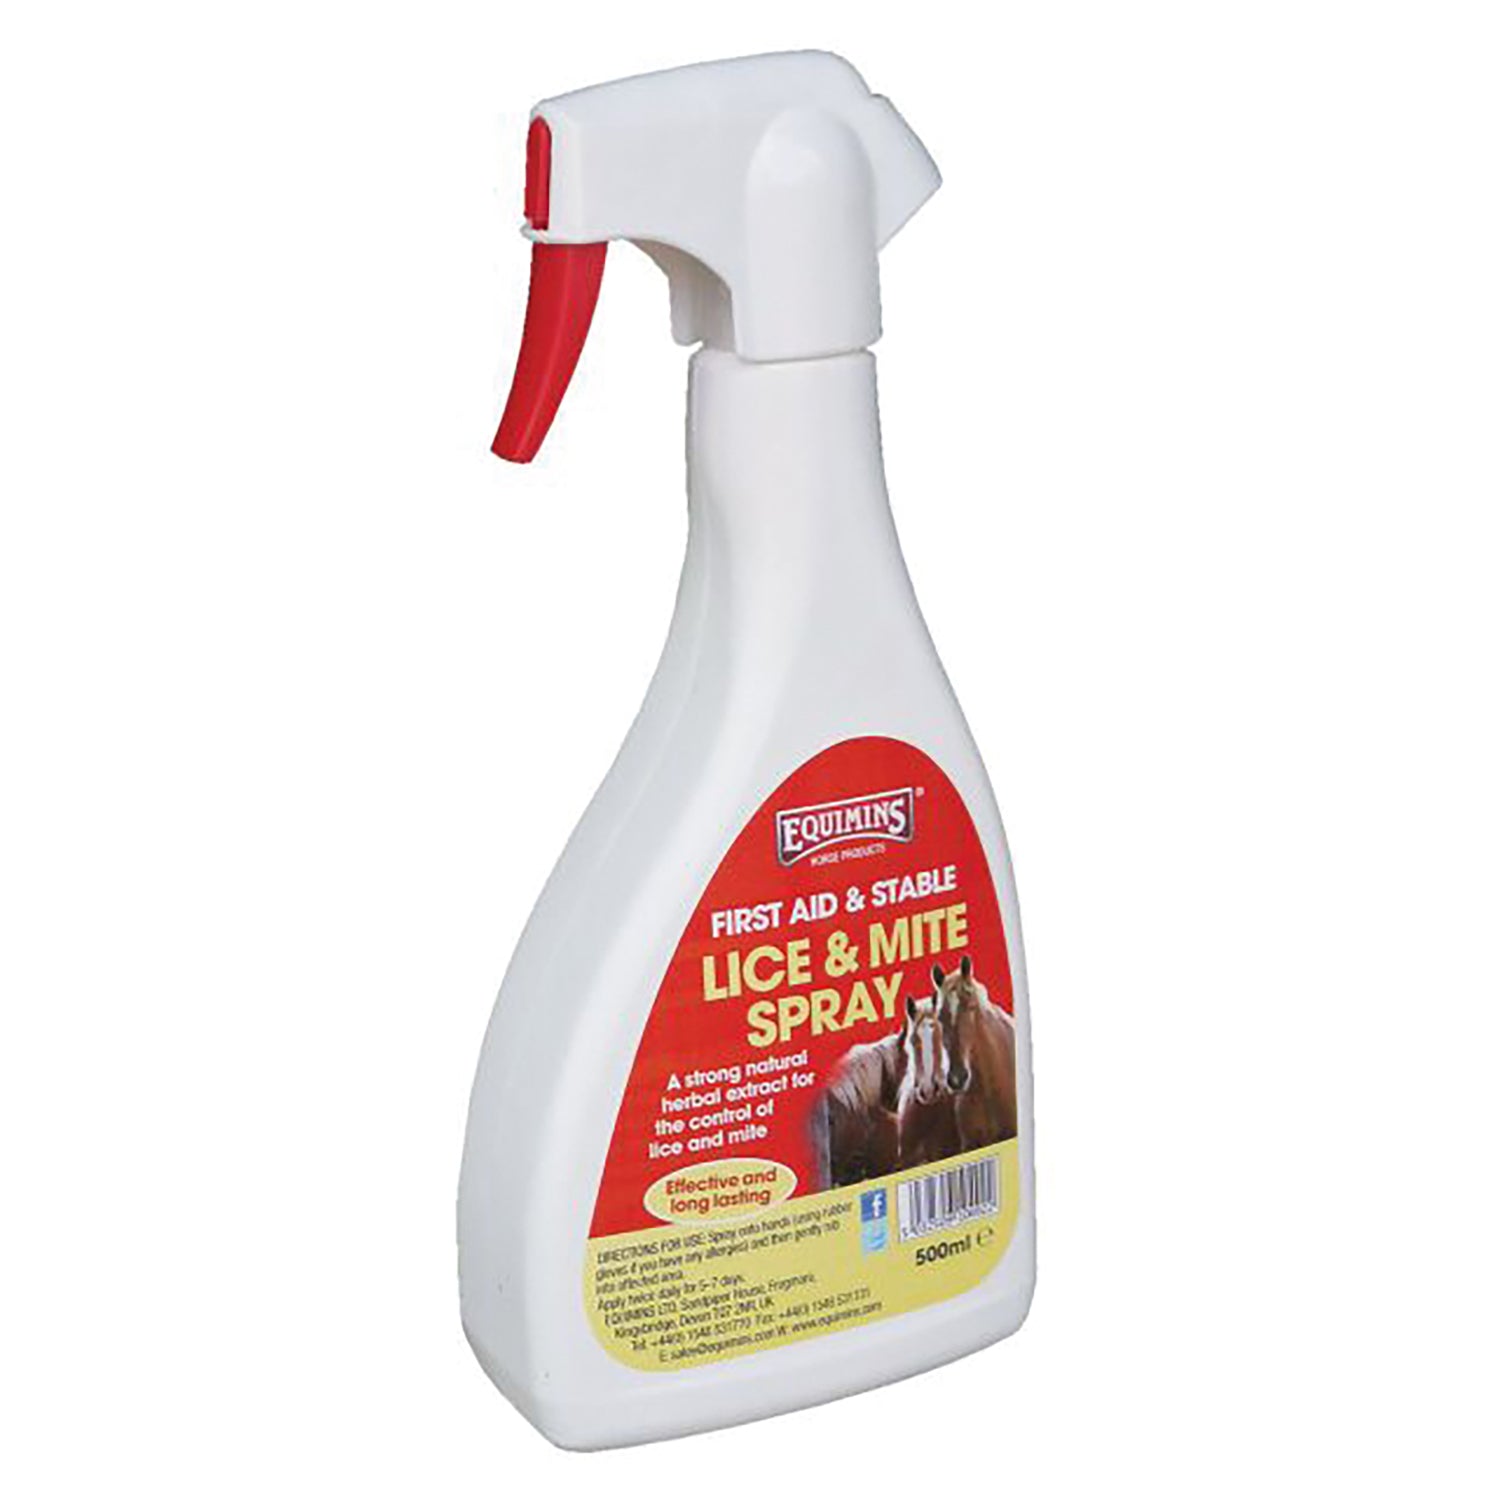 Equimins Lice And Mite Spray 500ml